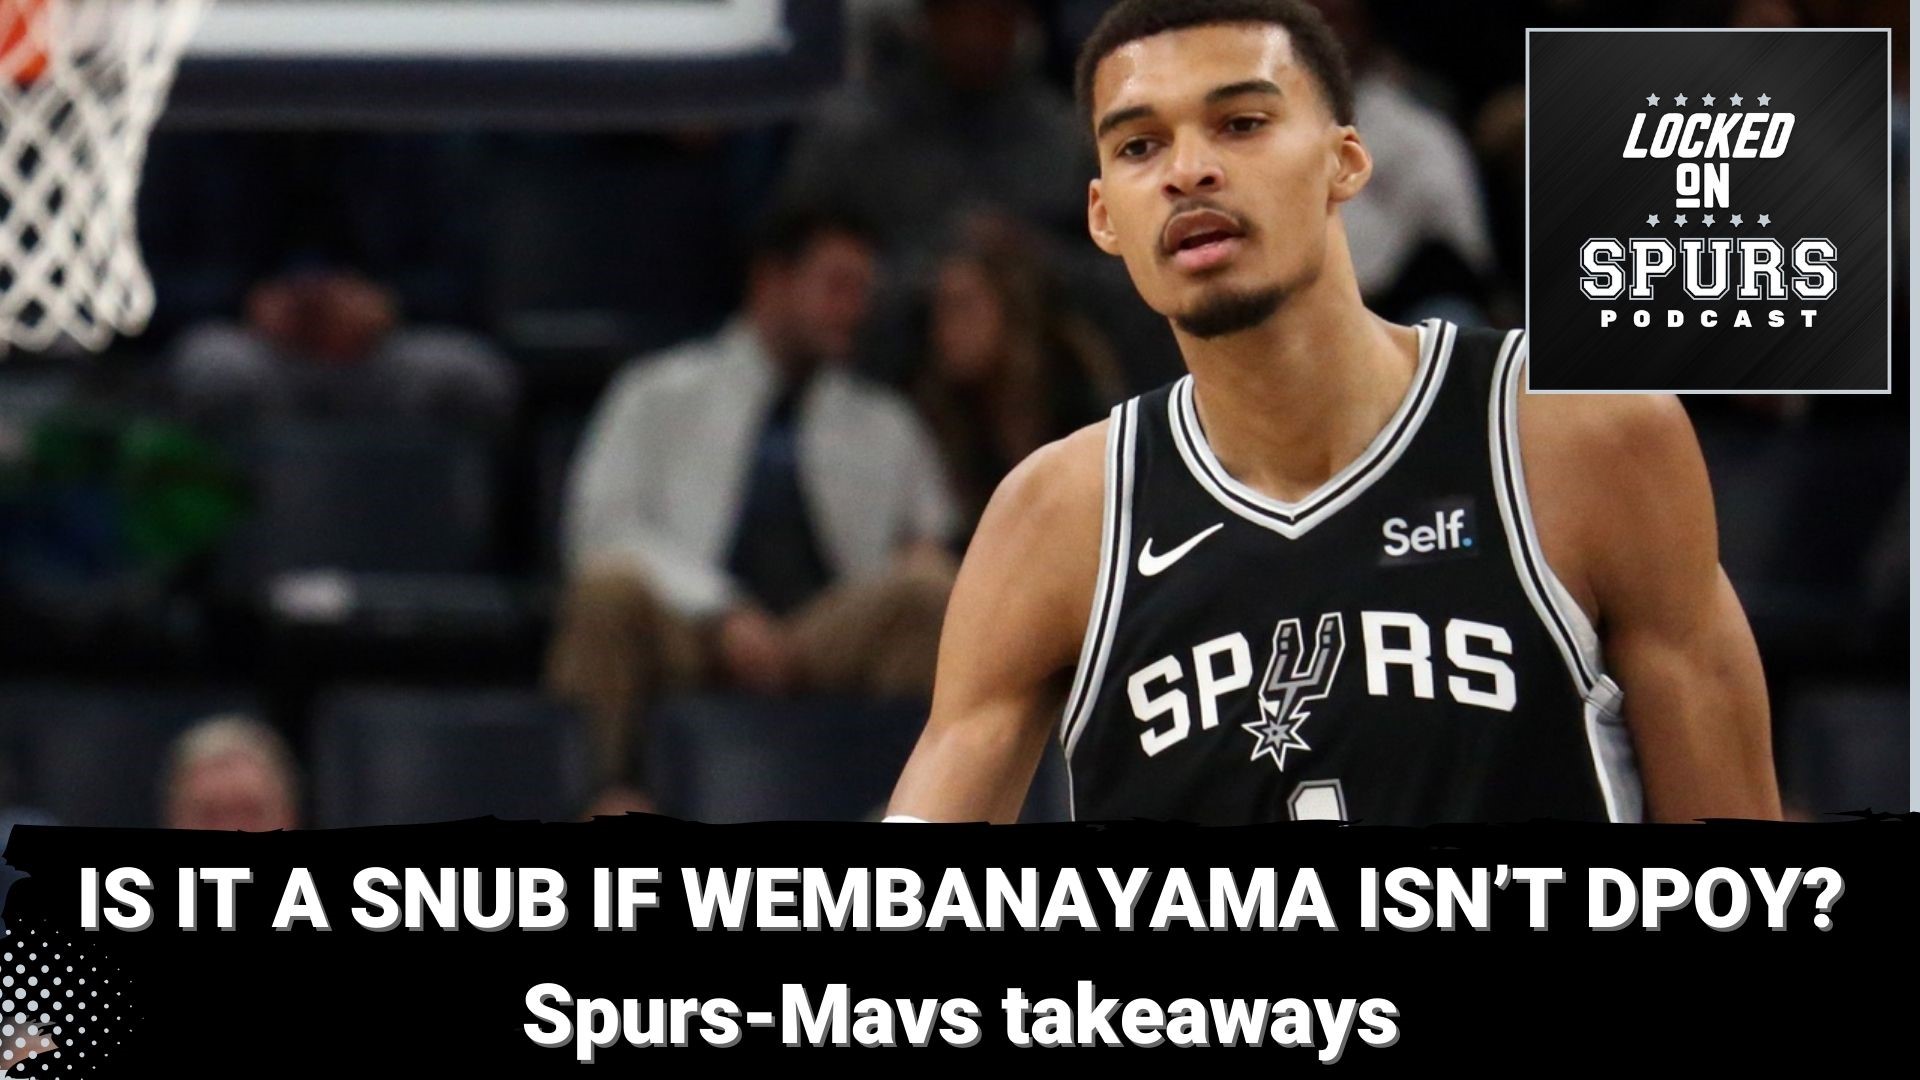 Also, takeaways from the Spurs' loss to the Mavs.